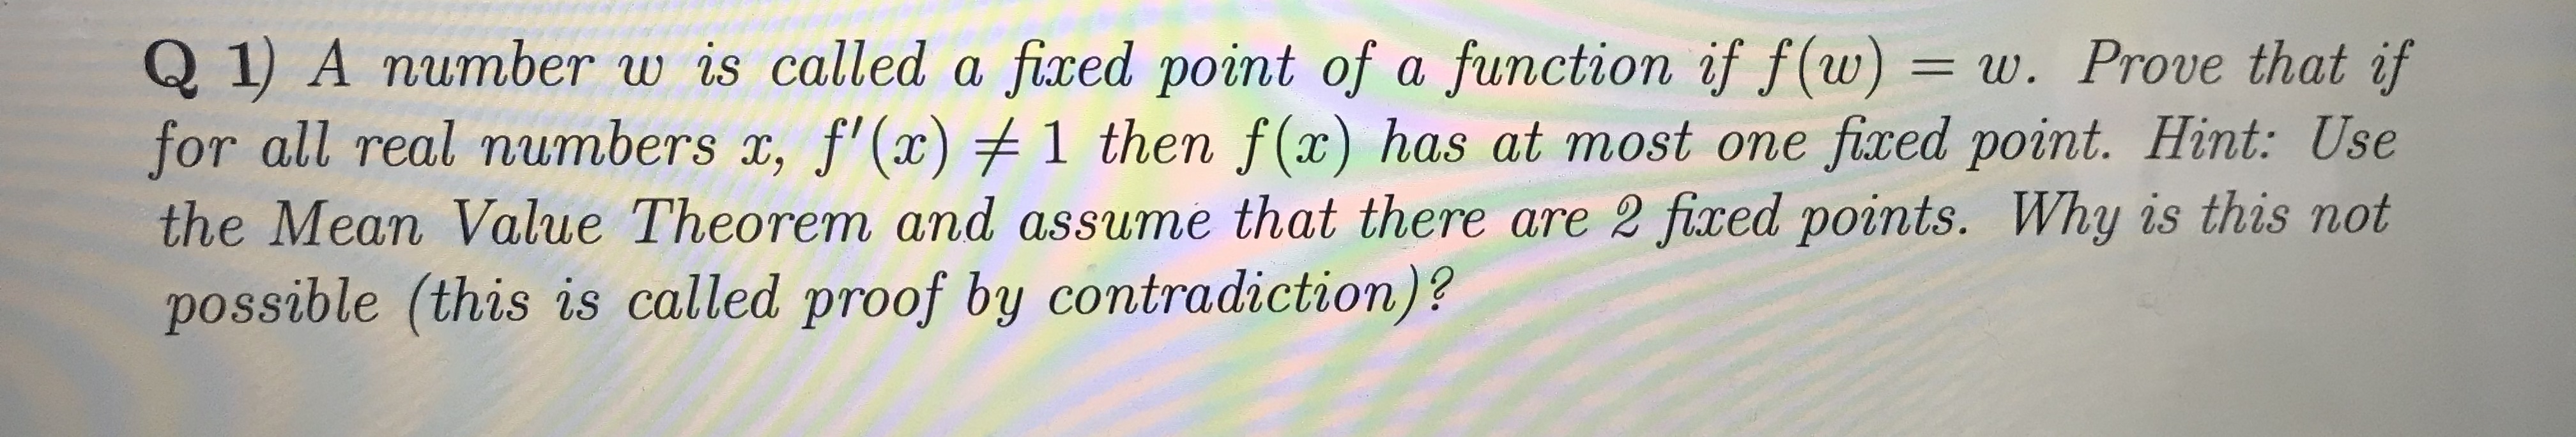 Q 1) A number w is called a fixed point of a function if f(w)
for all real numbers x, f'(x) 1 then f(x) has at most one fixed point. Hint: Use
the Mean Value Theorem and assume that there are 2 fixed points. Why is this not
possible (this is called proof by contradiction)?
= w. Prove that if
